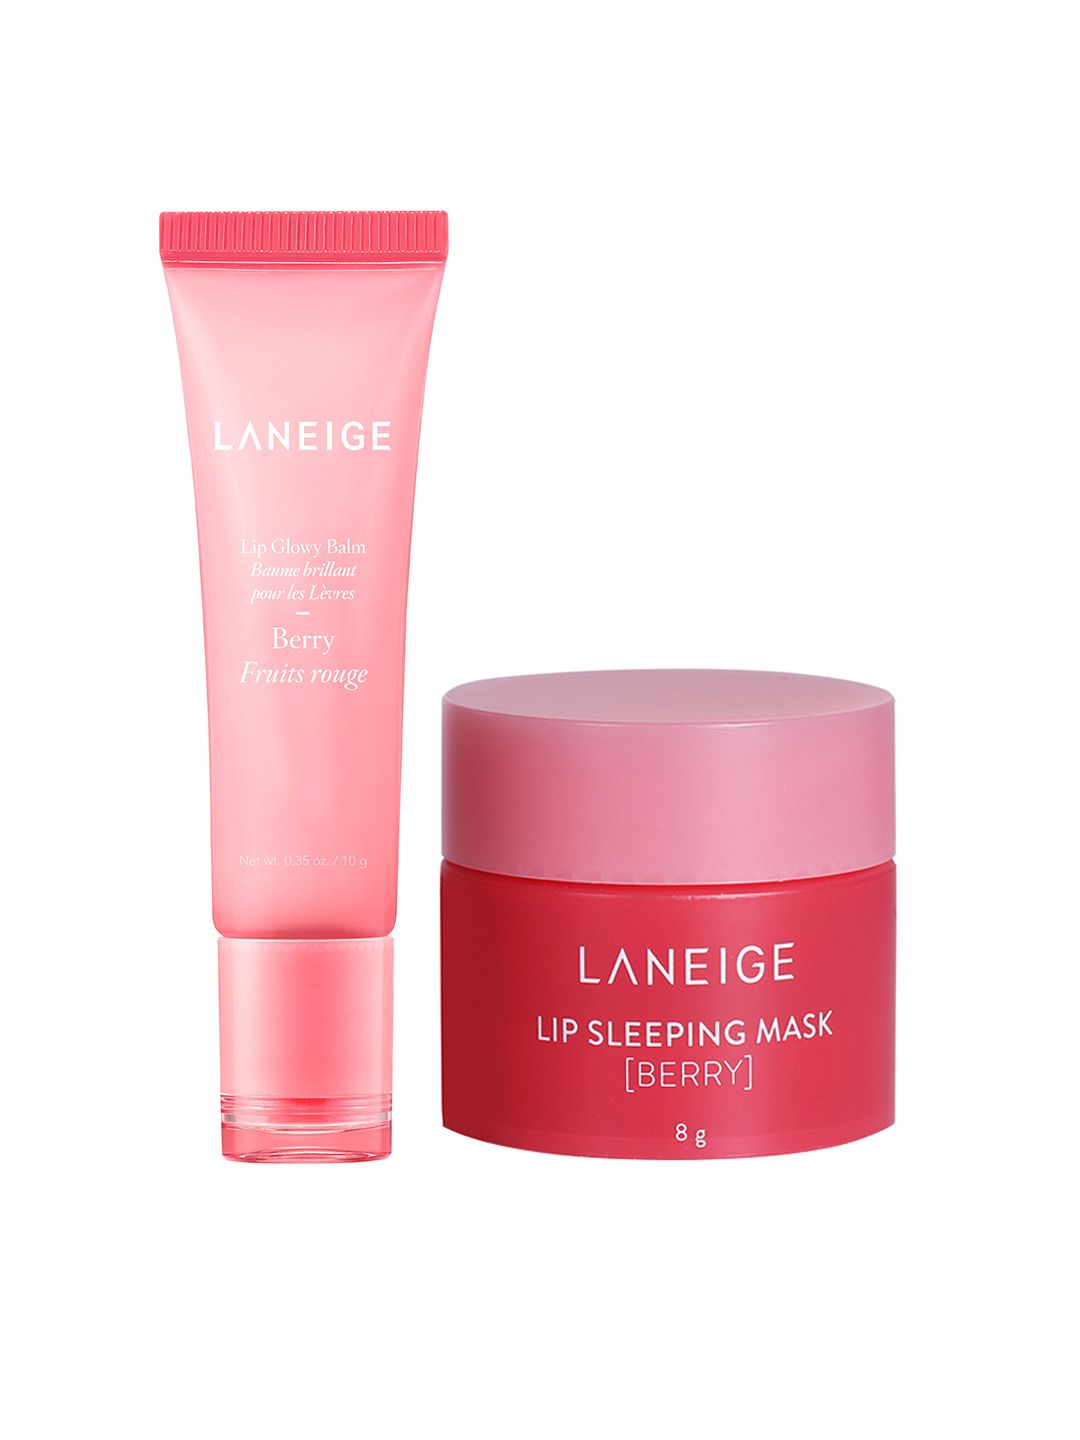 LANEIGE Set of Lip Sleeping Mask - Berry 8 g & Lip Glowy Balm - Berry Fruits Rouge 10 g Price in India